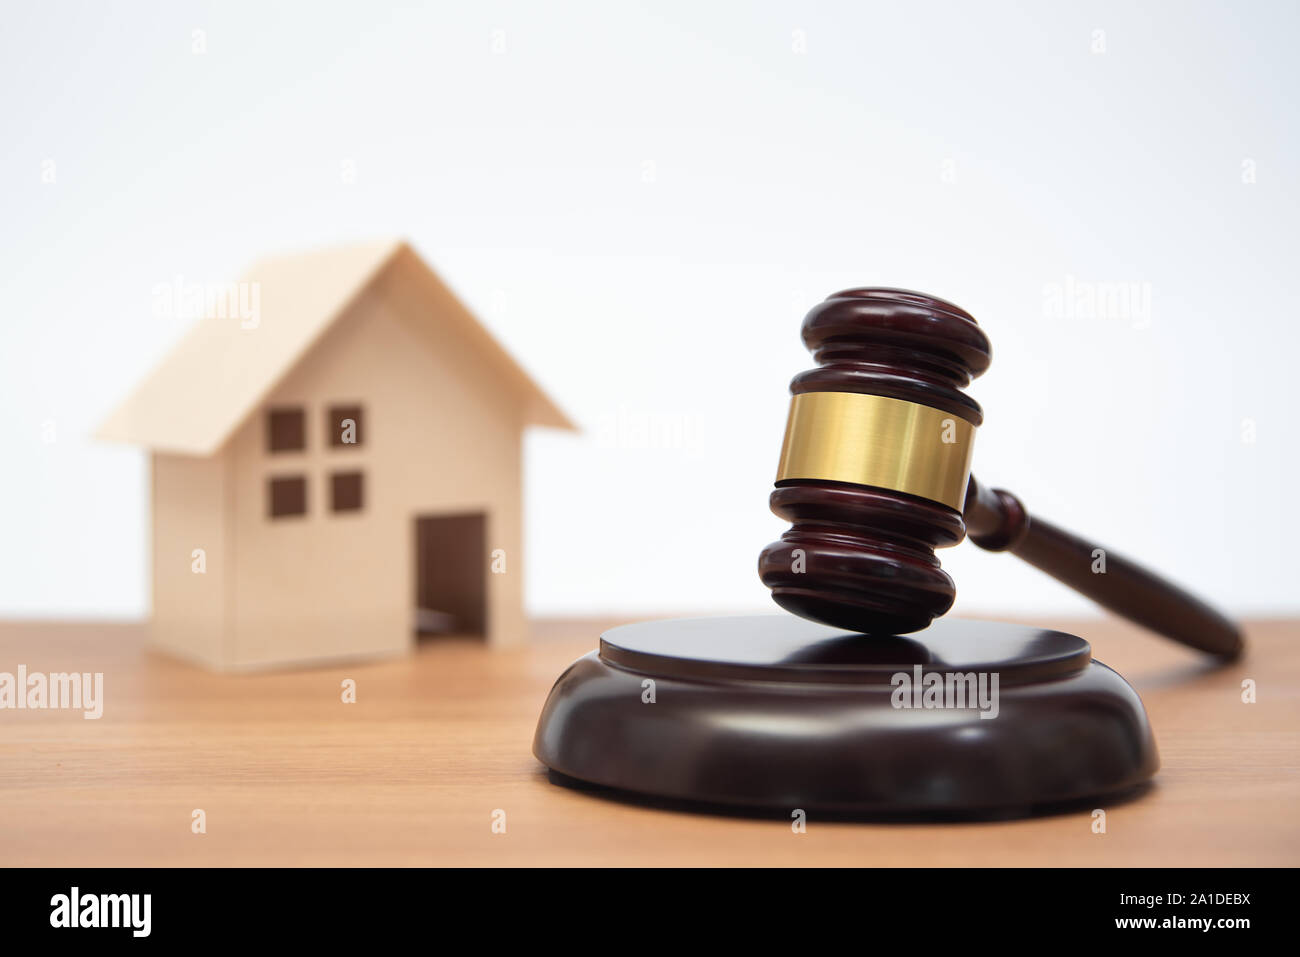 Auction or law concept. Miniature House on wooden table and judge gavel. Stock Photo